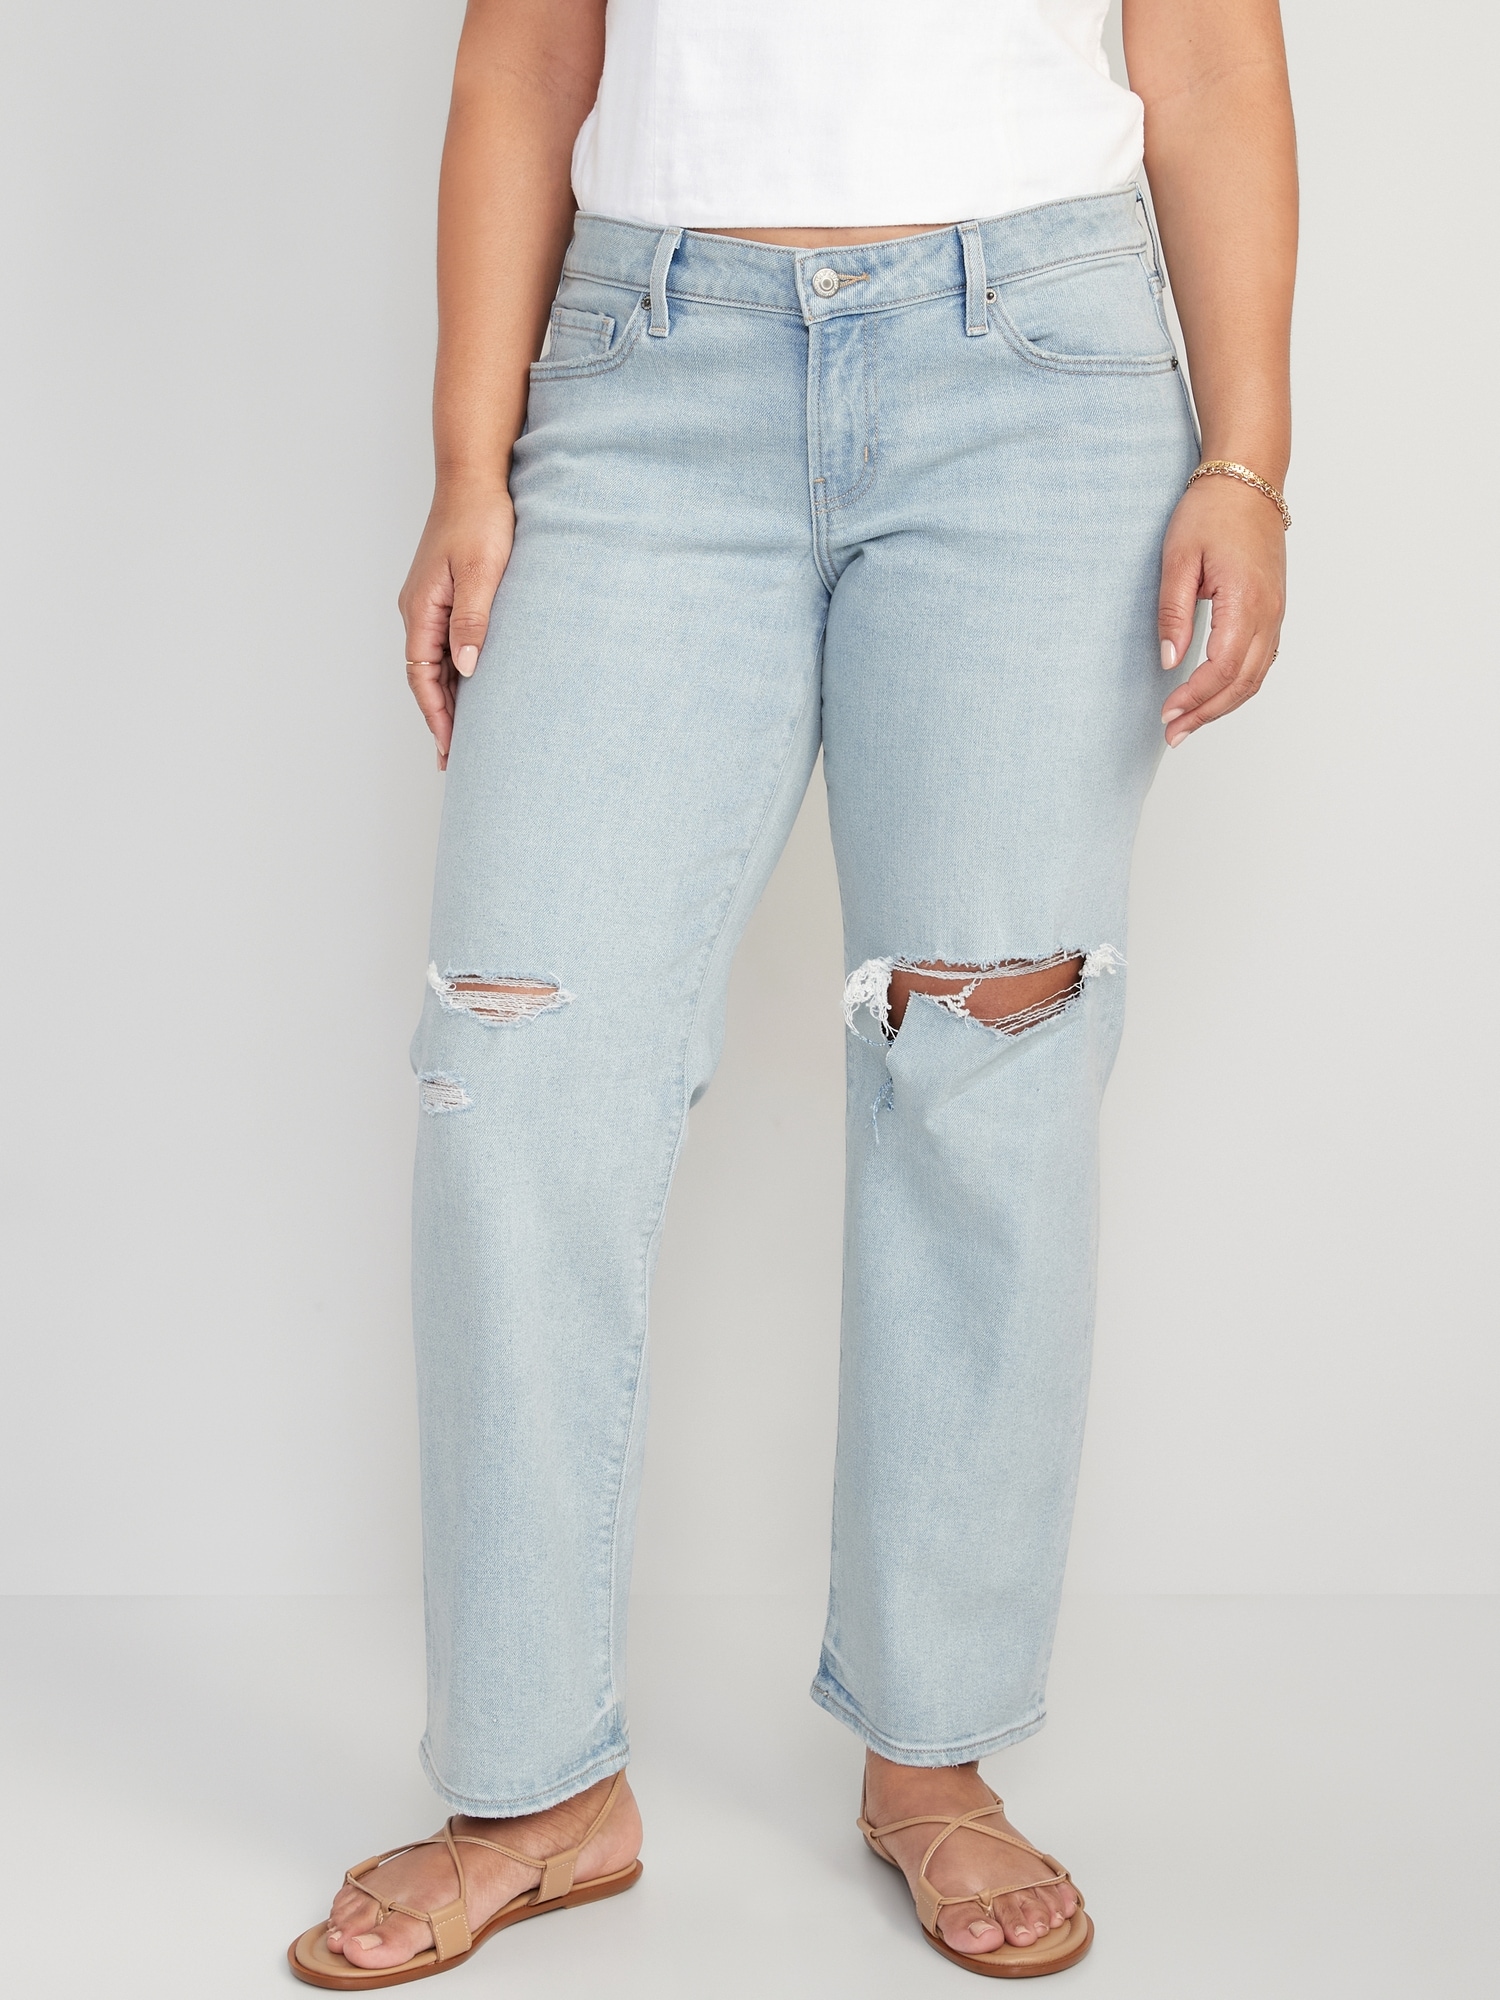 Low-Rise OG Loose Ripped Jeans | Old Navy